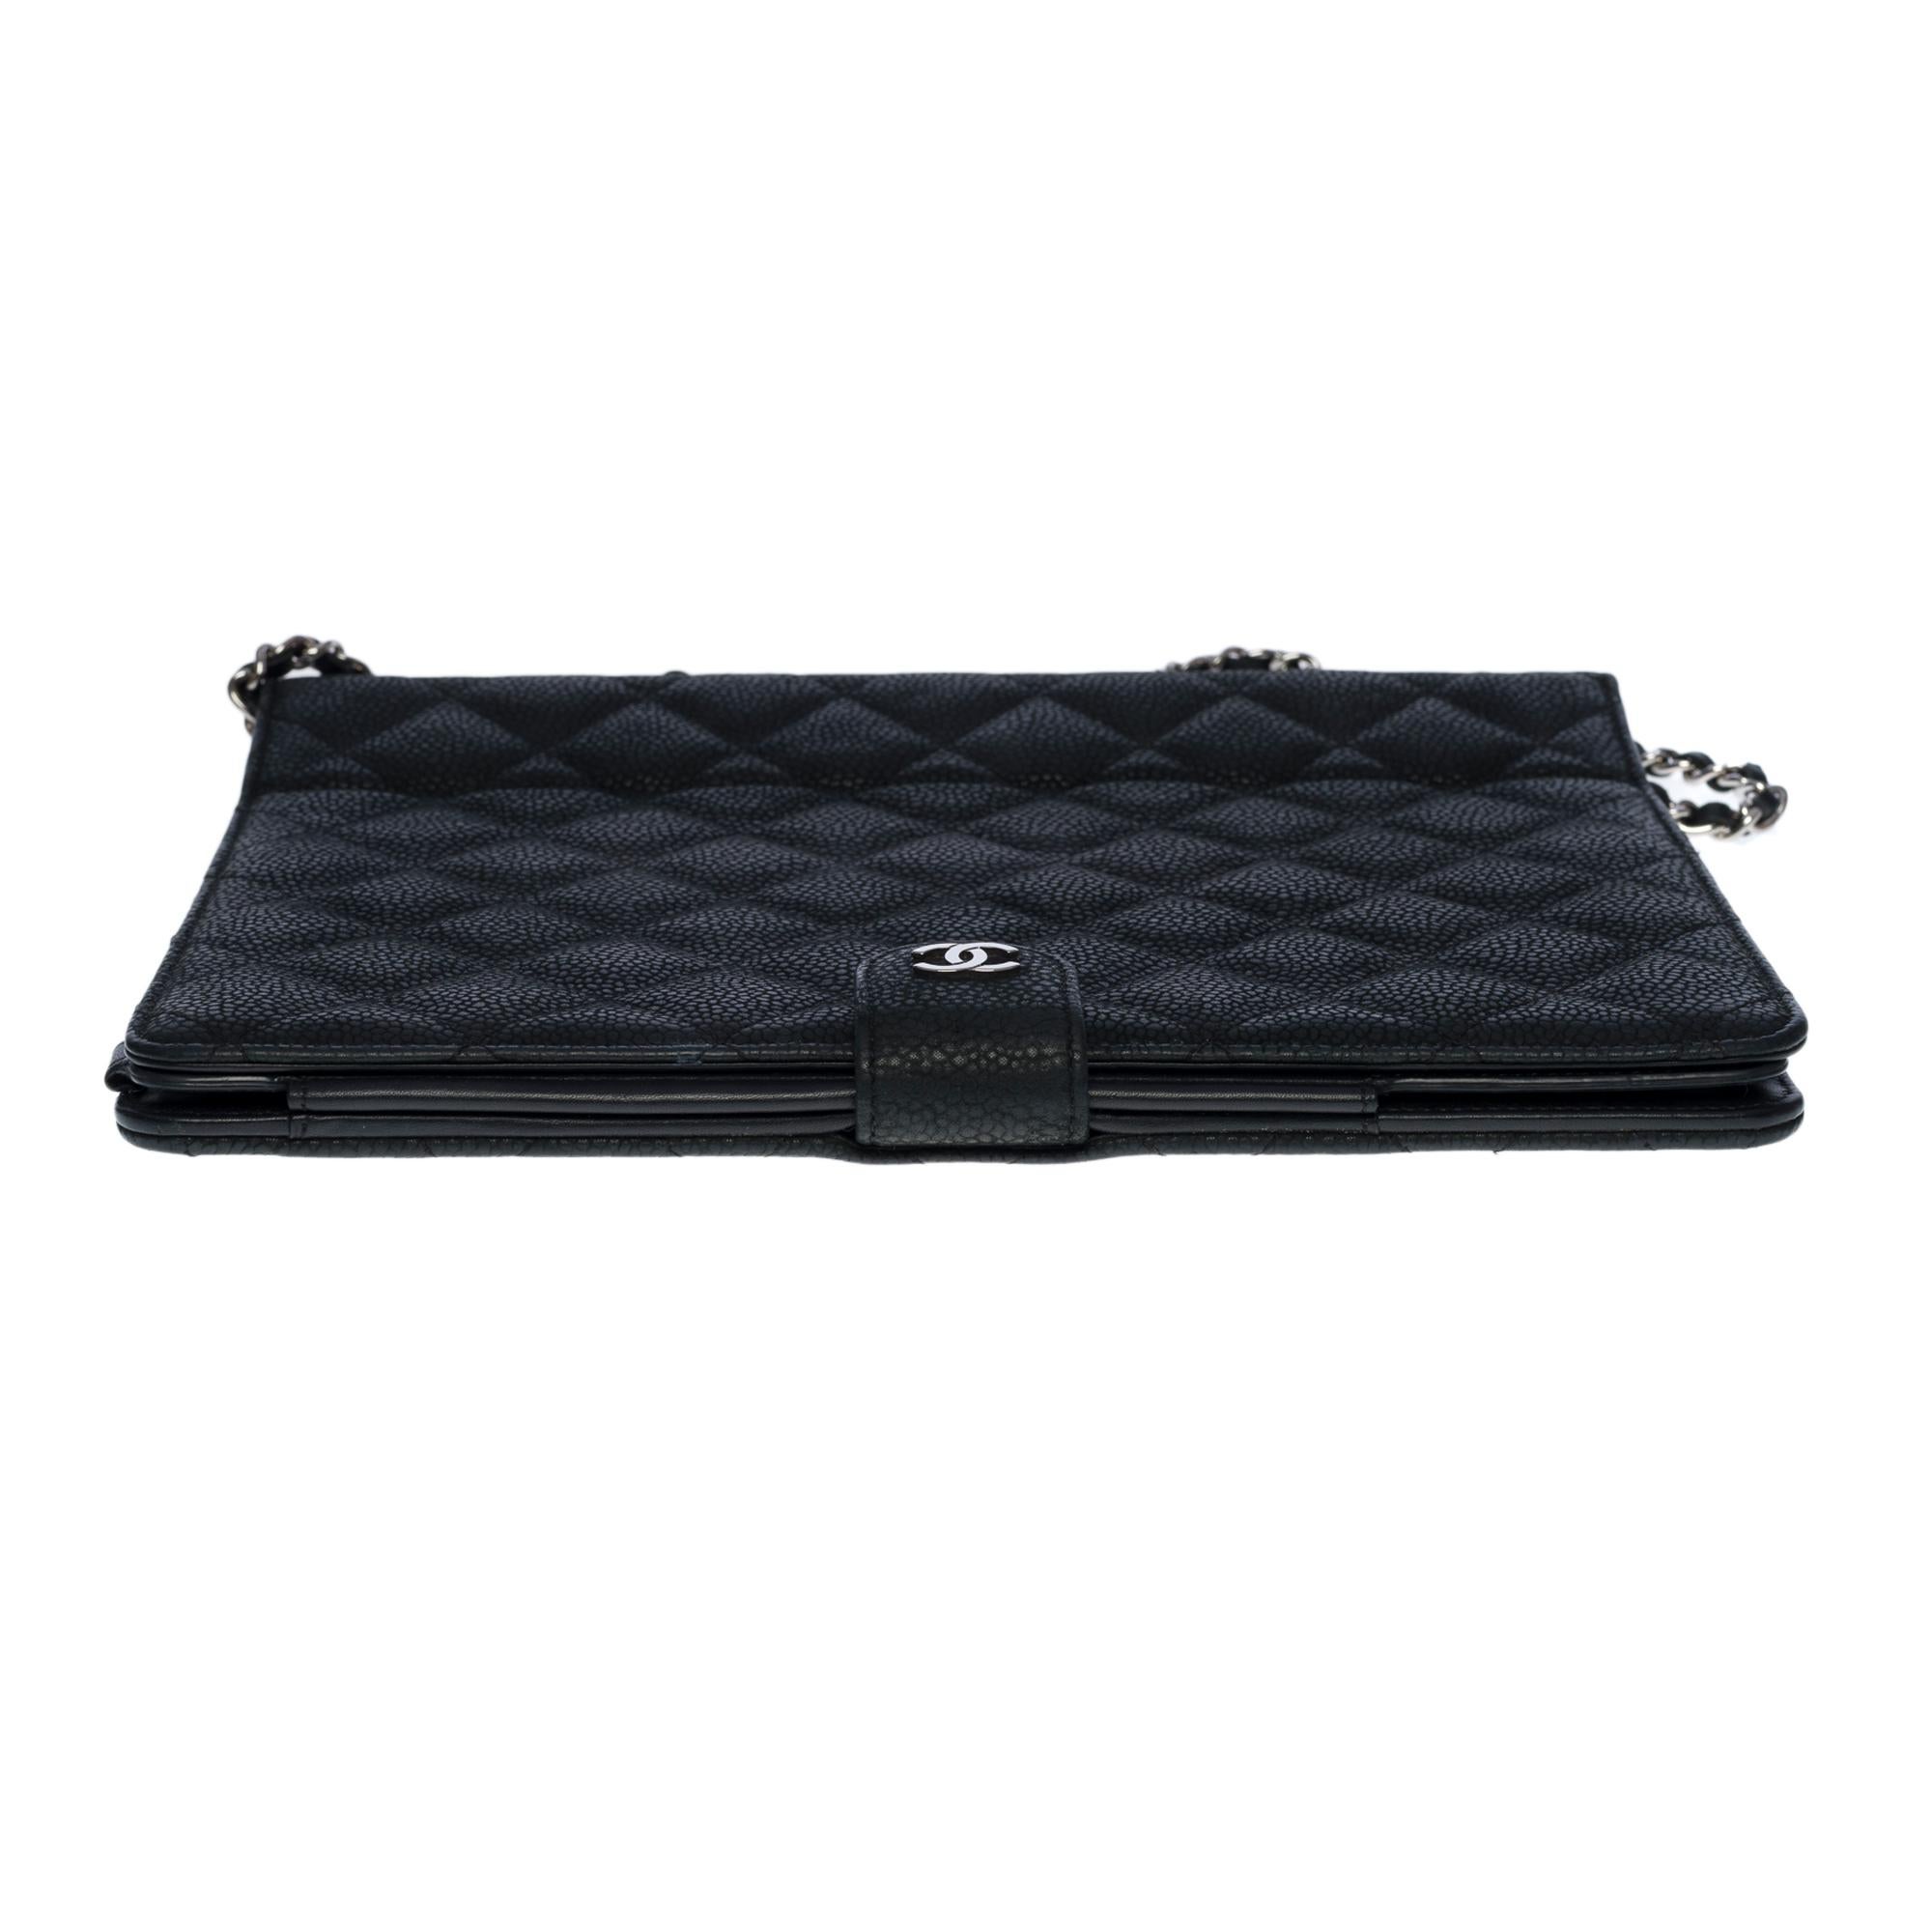 Rare Chanel Ipad/Tablet pouch in black mattified caviar leather, SHW 1